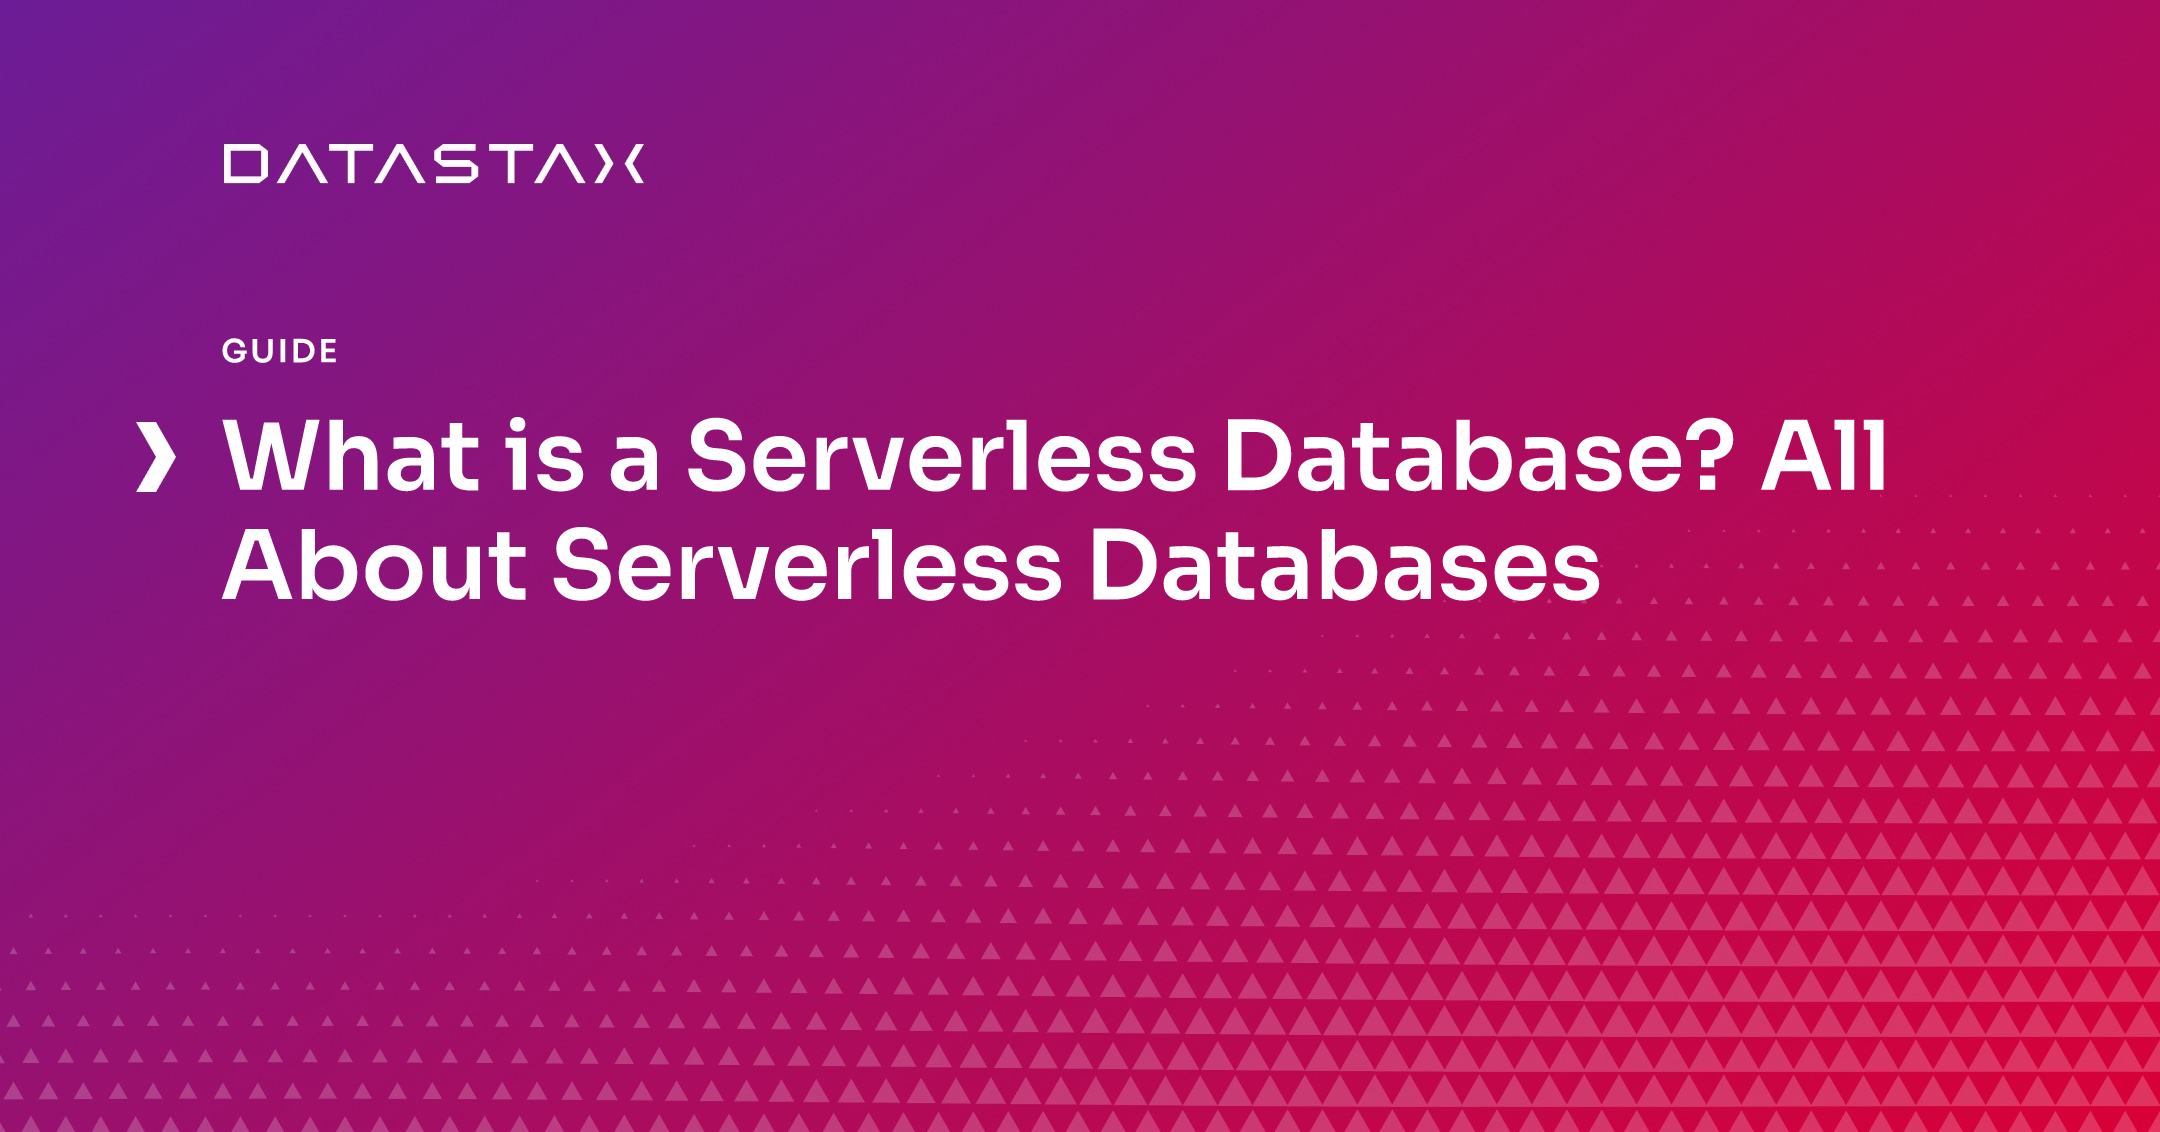 What is a Serverless Database? All About Serverless Databases